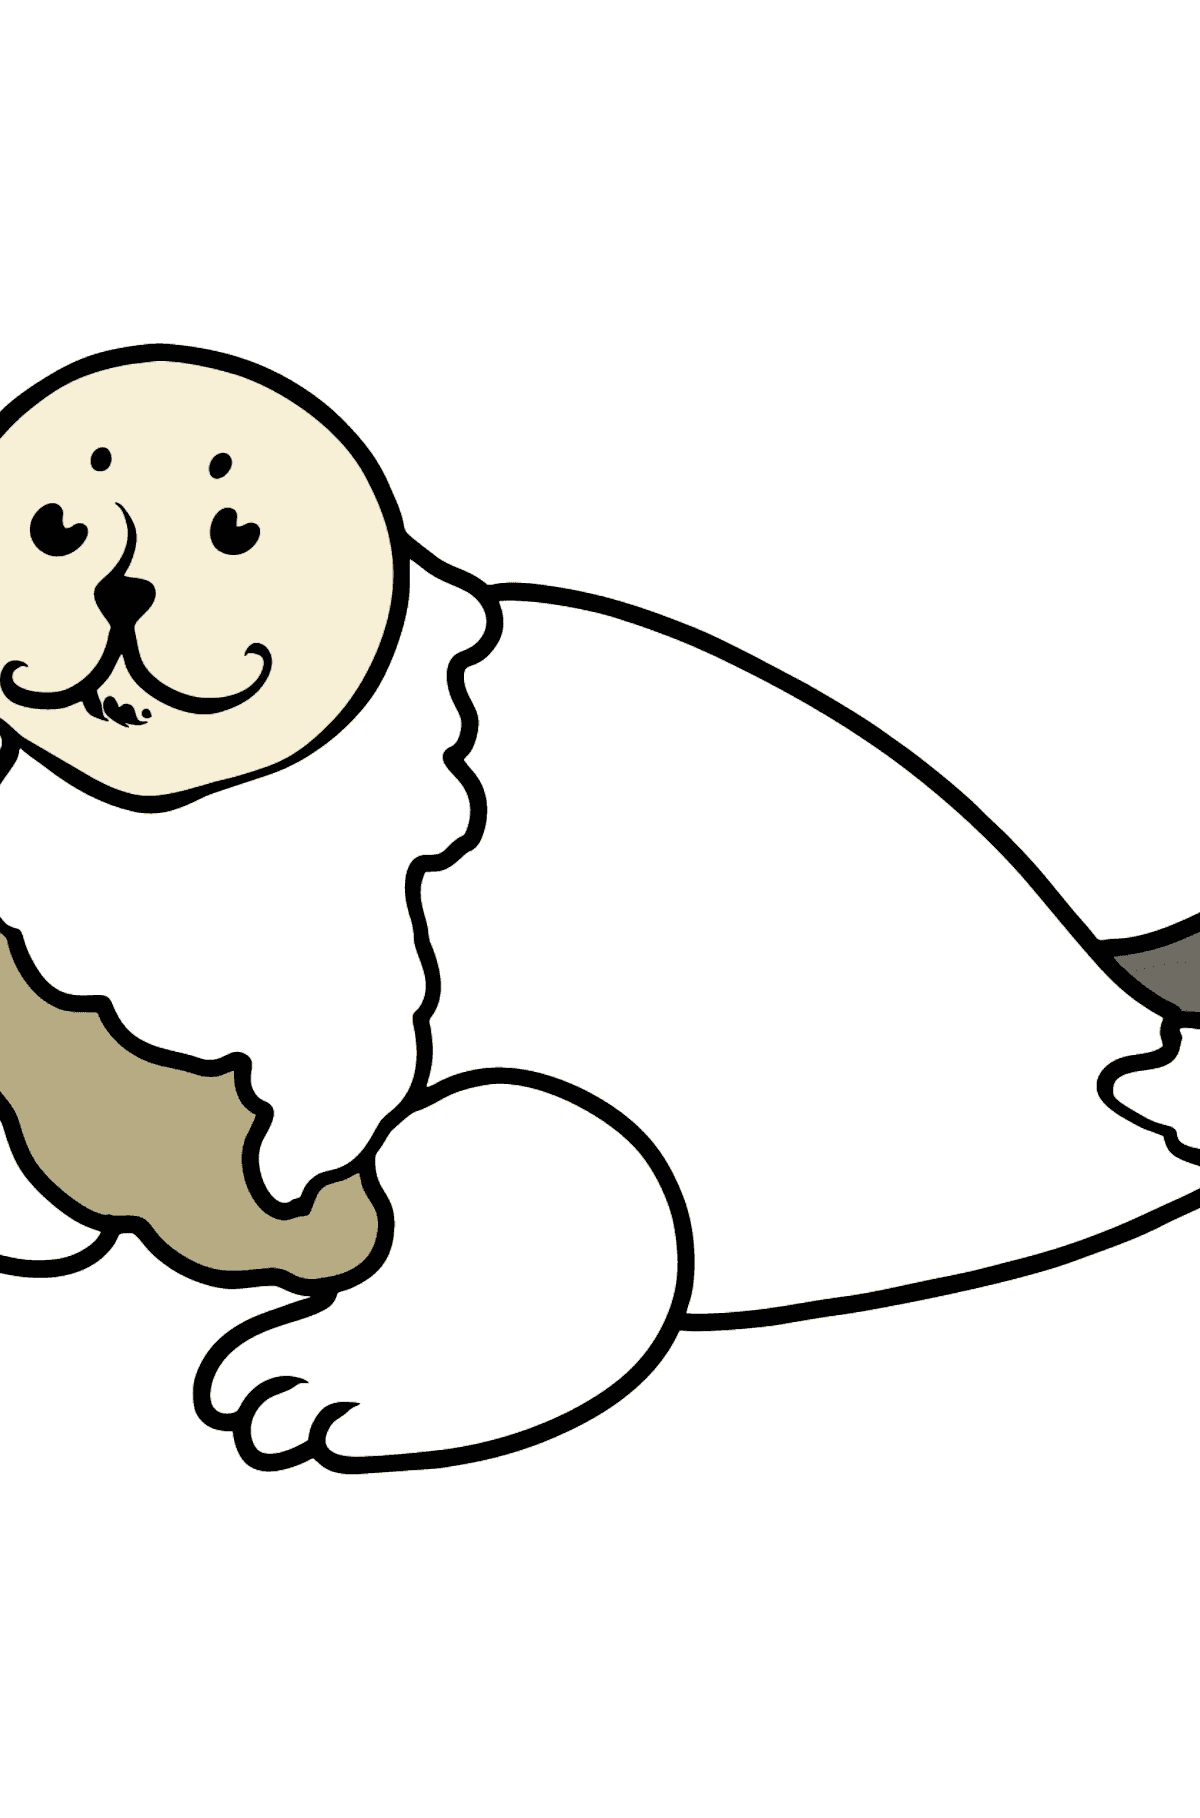 Seal coloring page - Coloring Pages for Kids